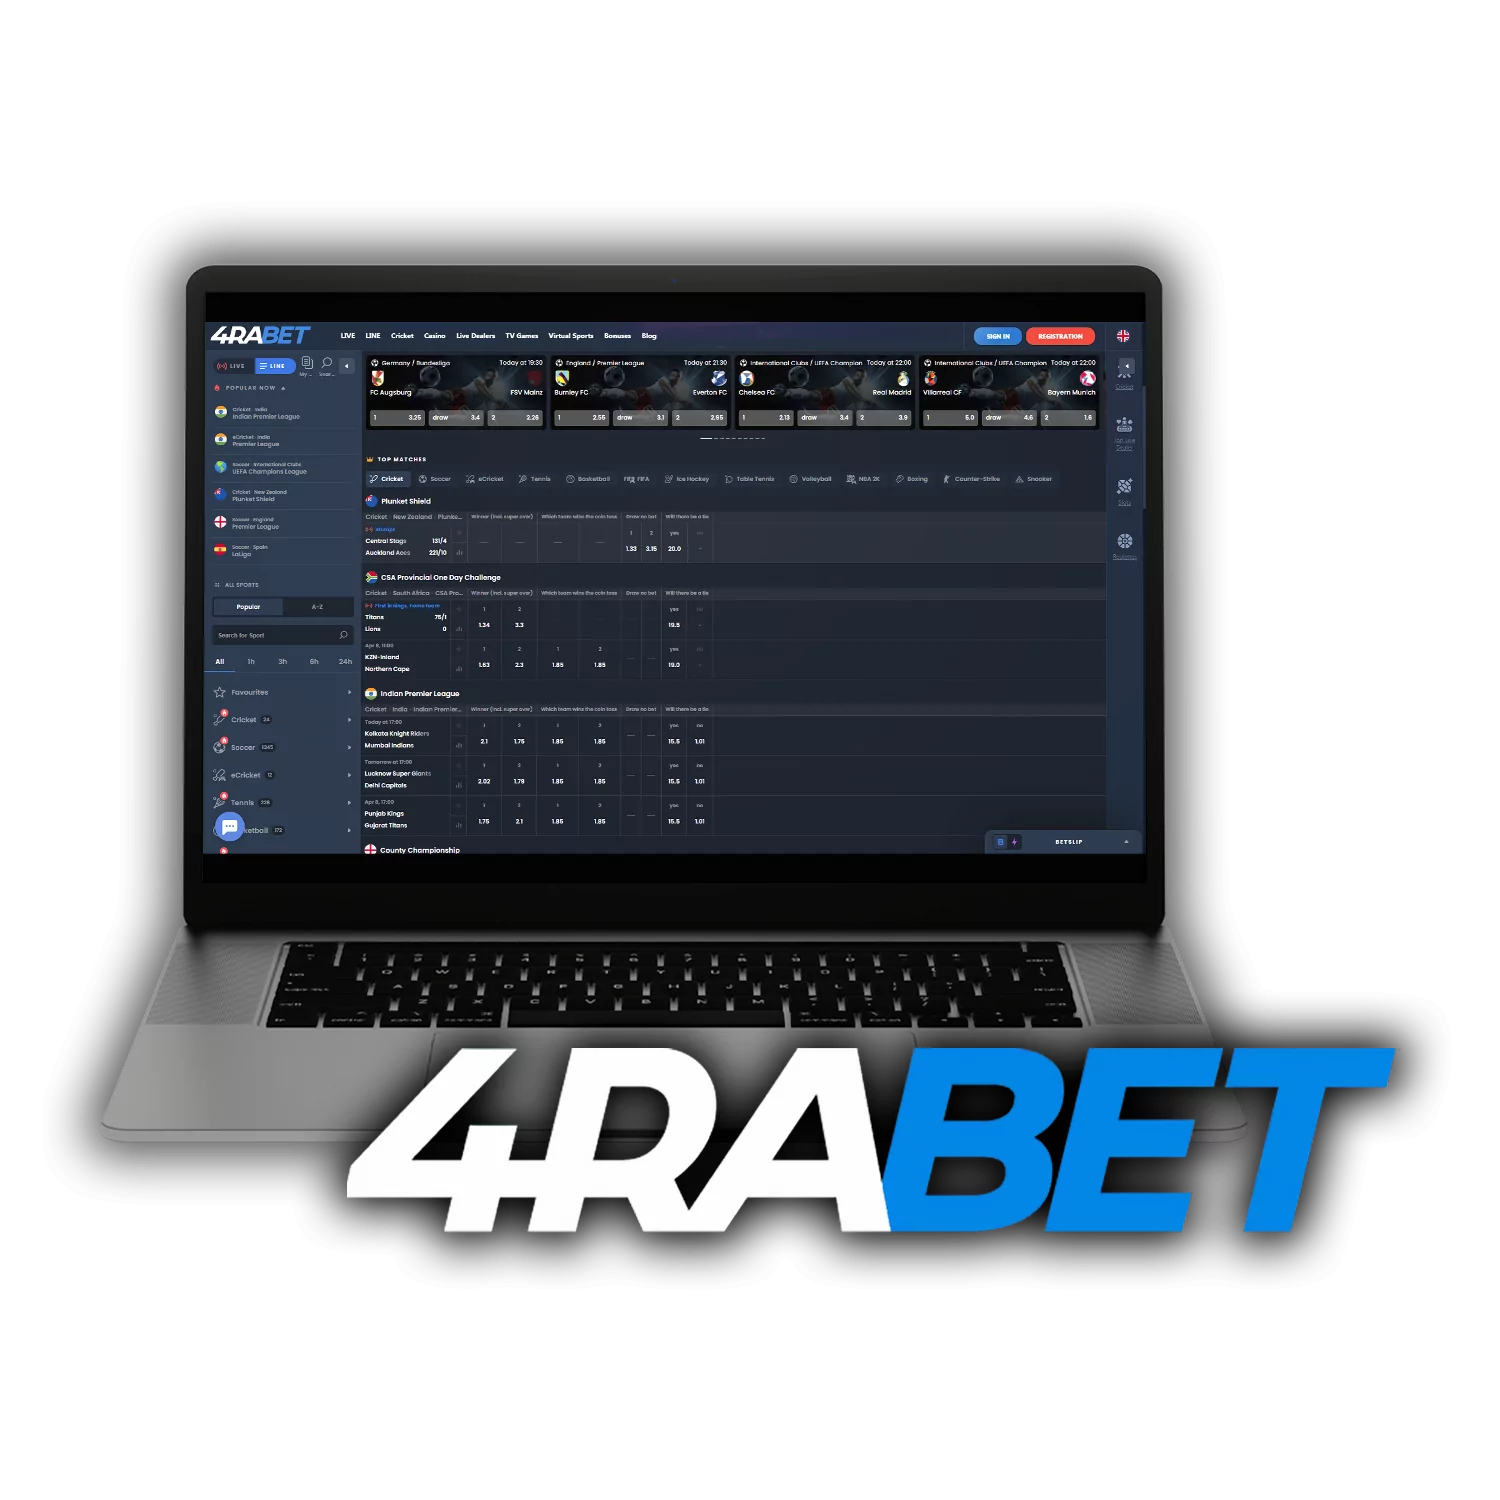 Learn about the features of the PC version for sports betting and casino for Windows and MacOS users.